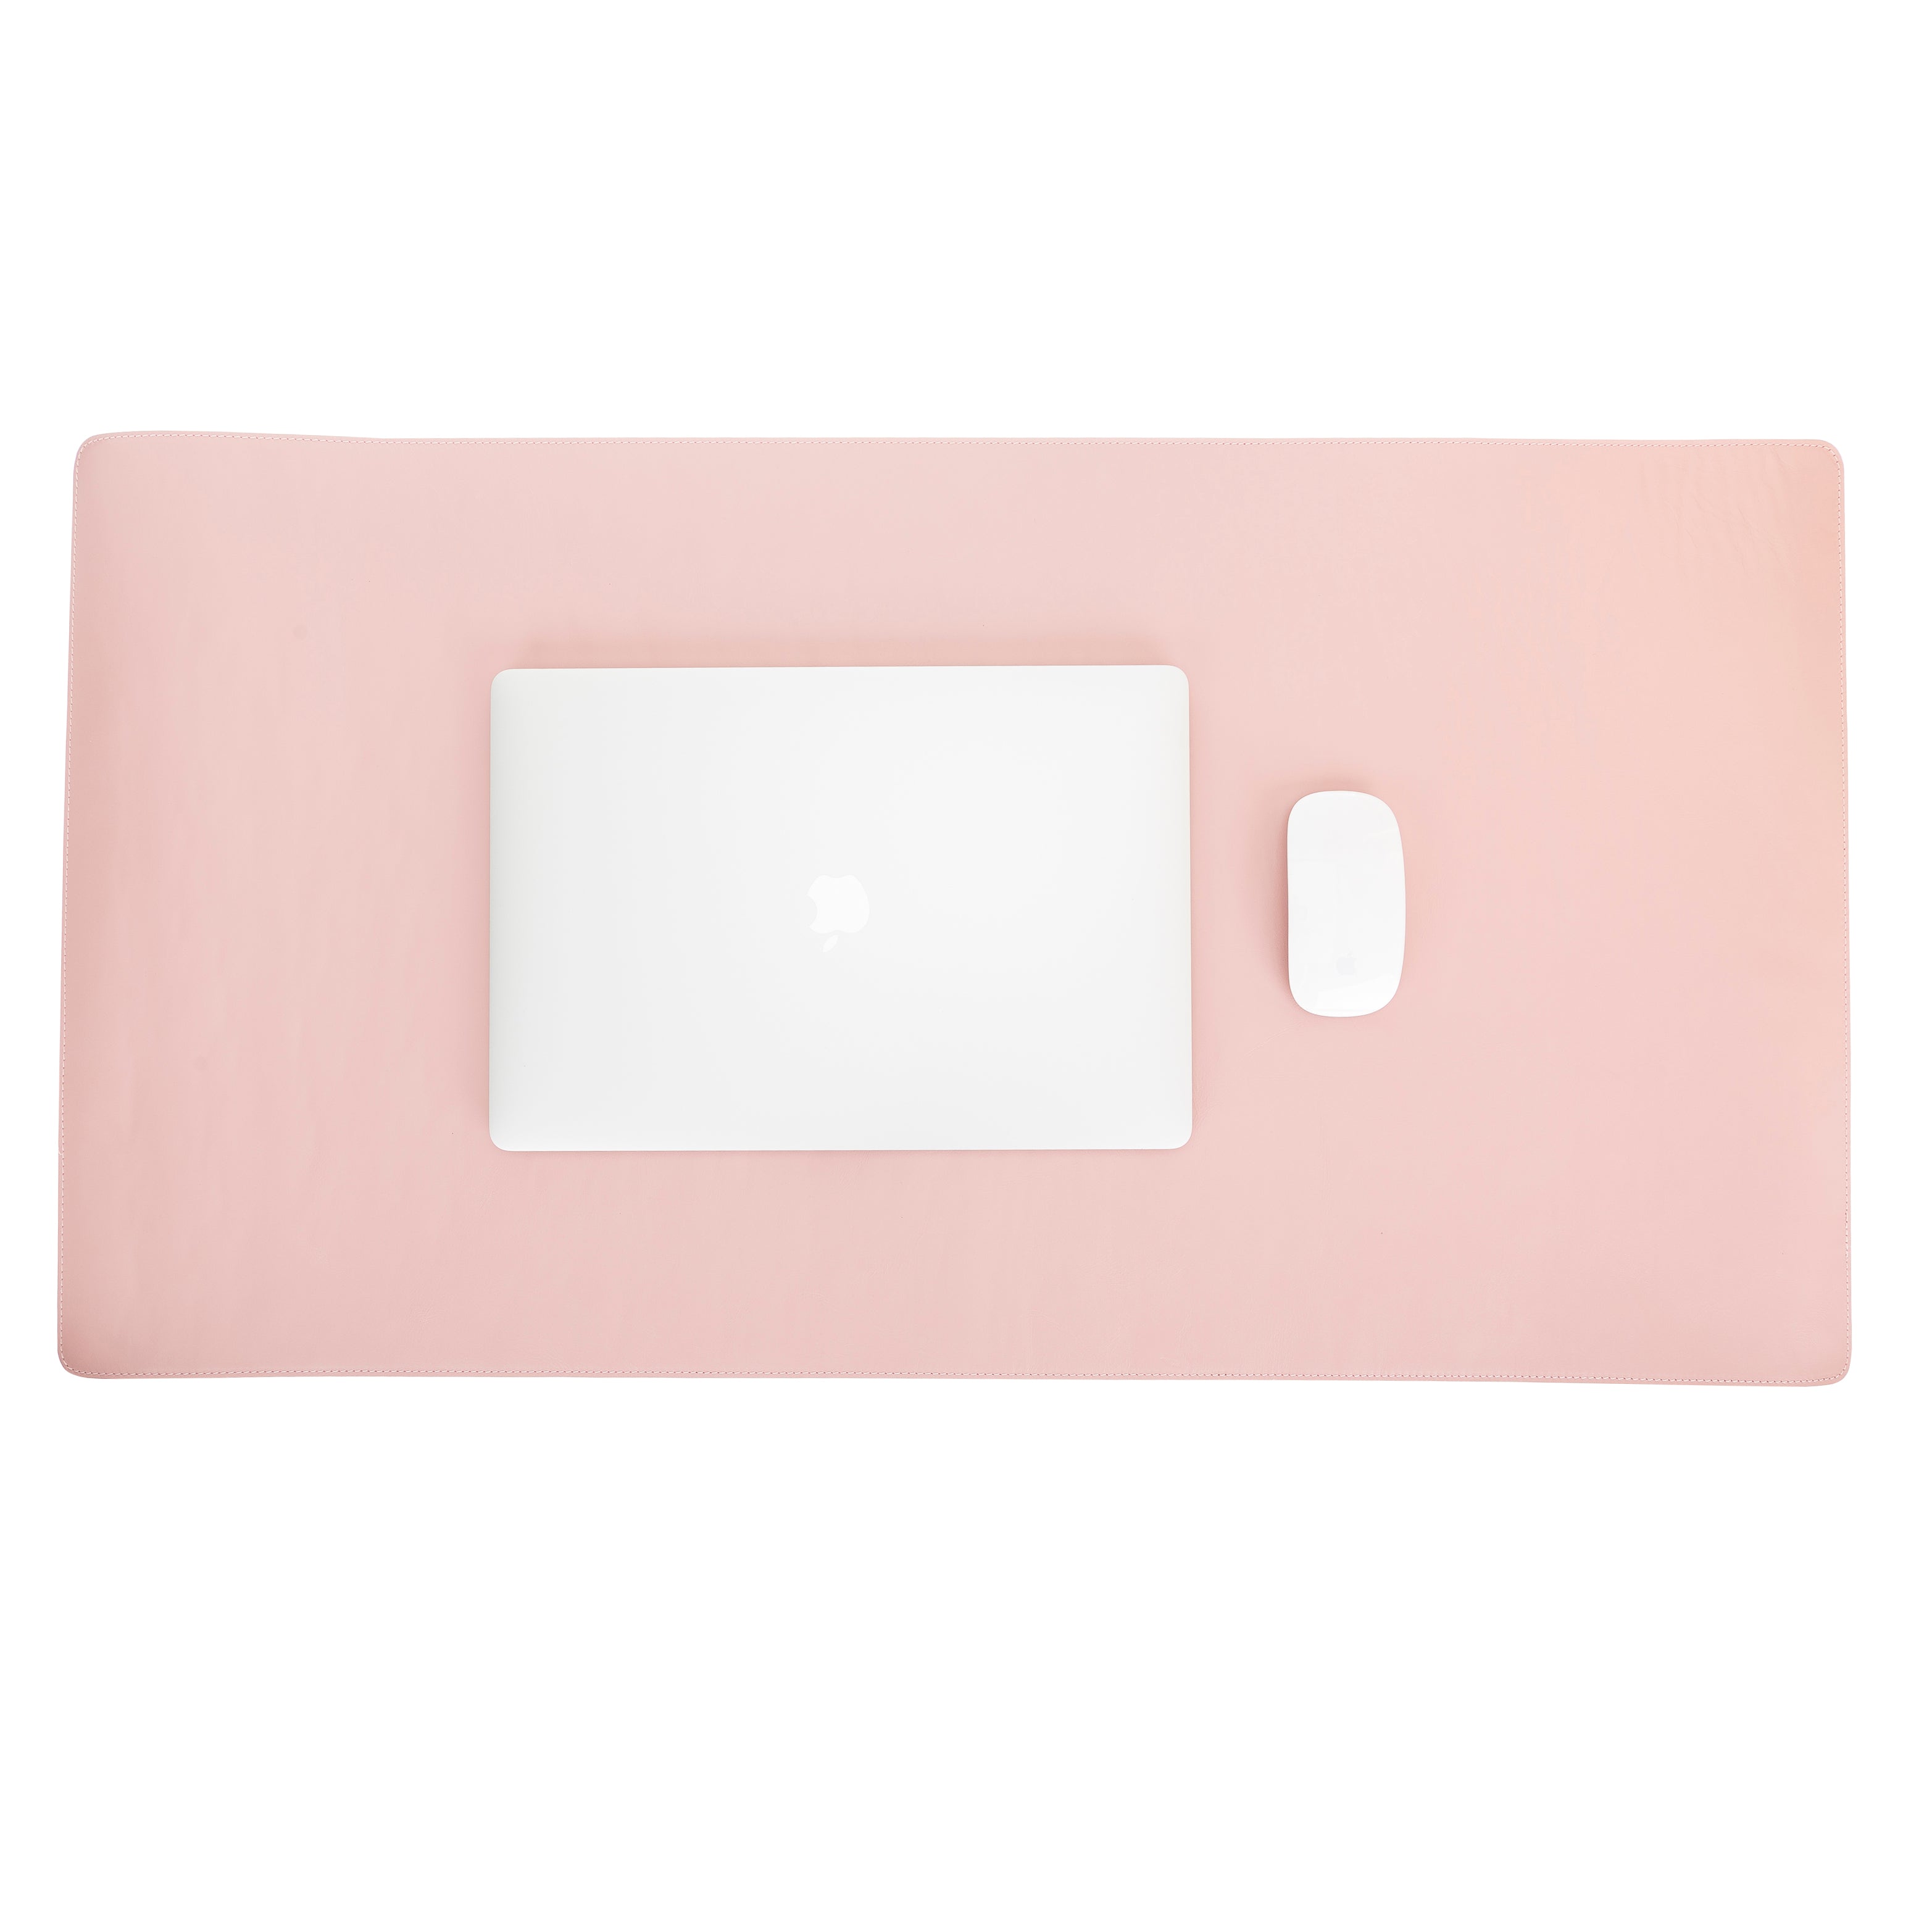 LupinnyLeather Genuine Leather Deskmat, Computer Pad, Office Desk Pad (Pink Nude) 6